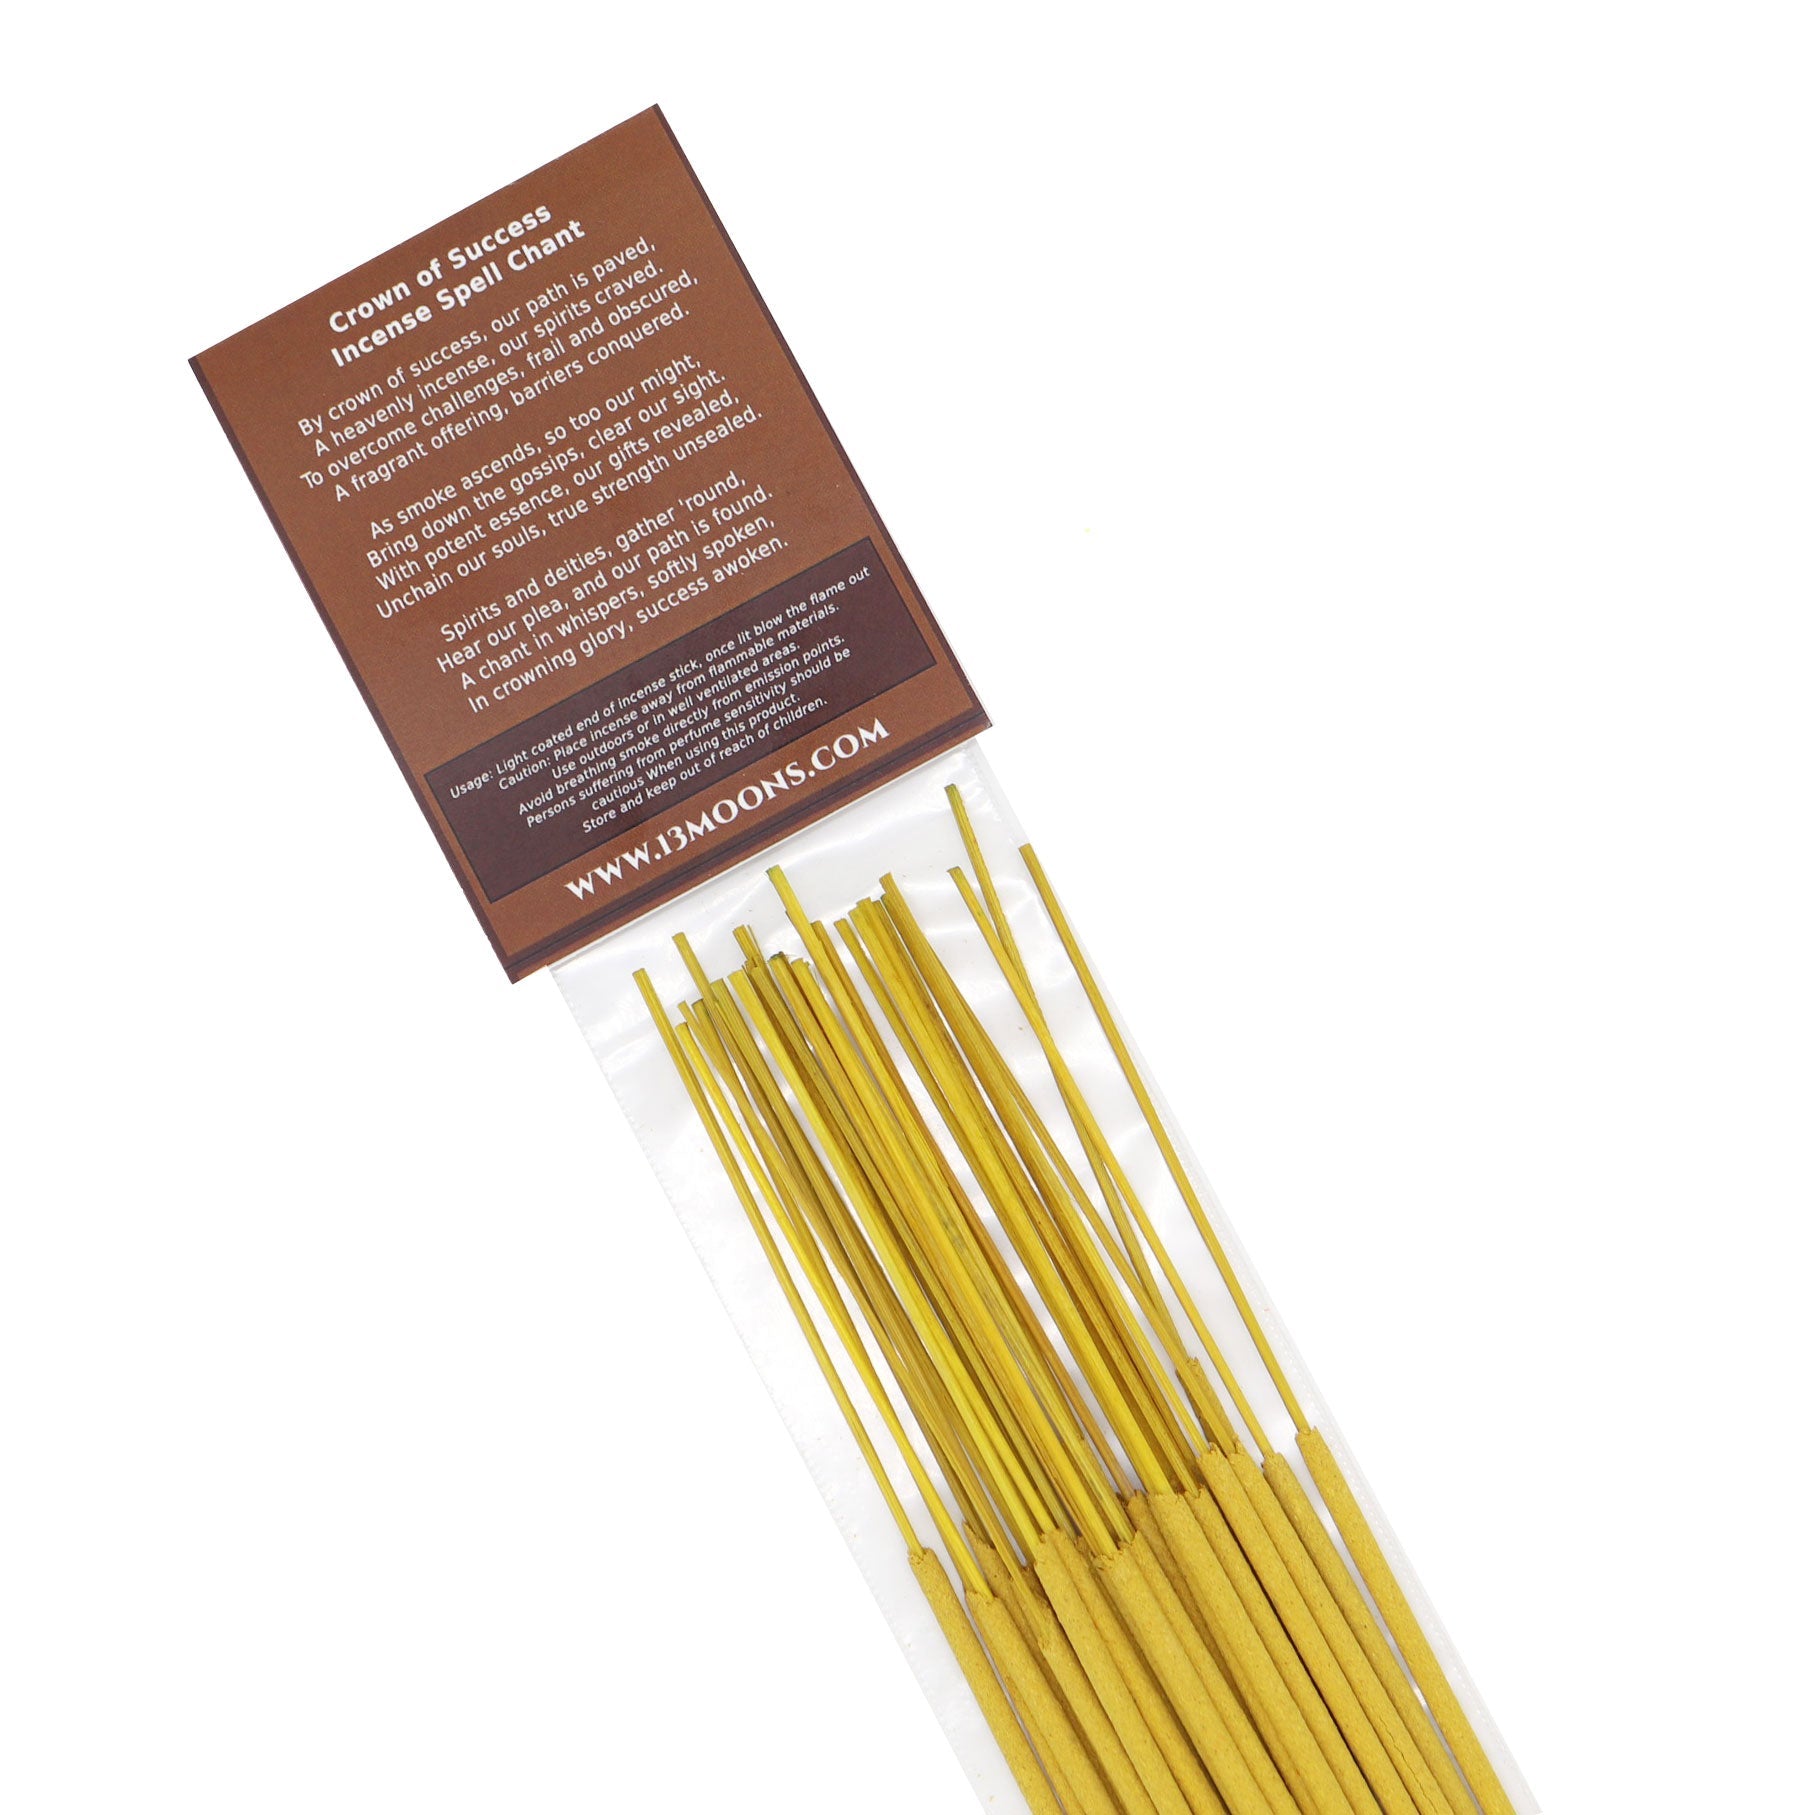 Crown of Success Incense - 13 Moons